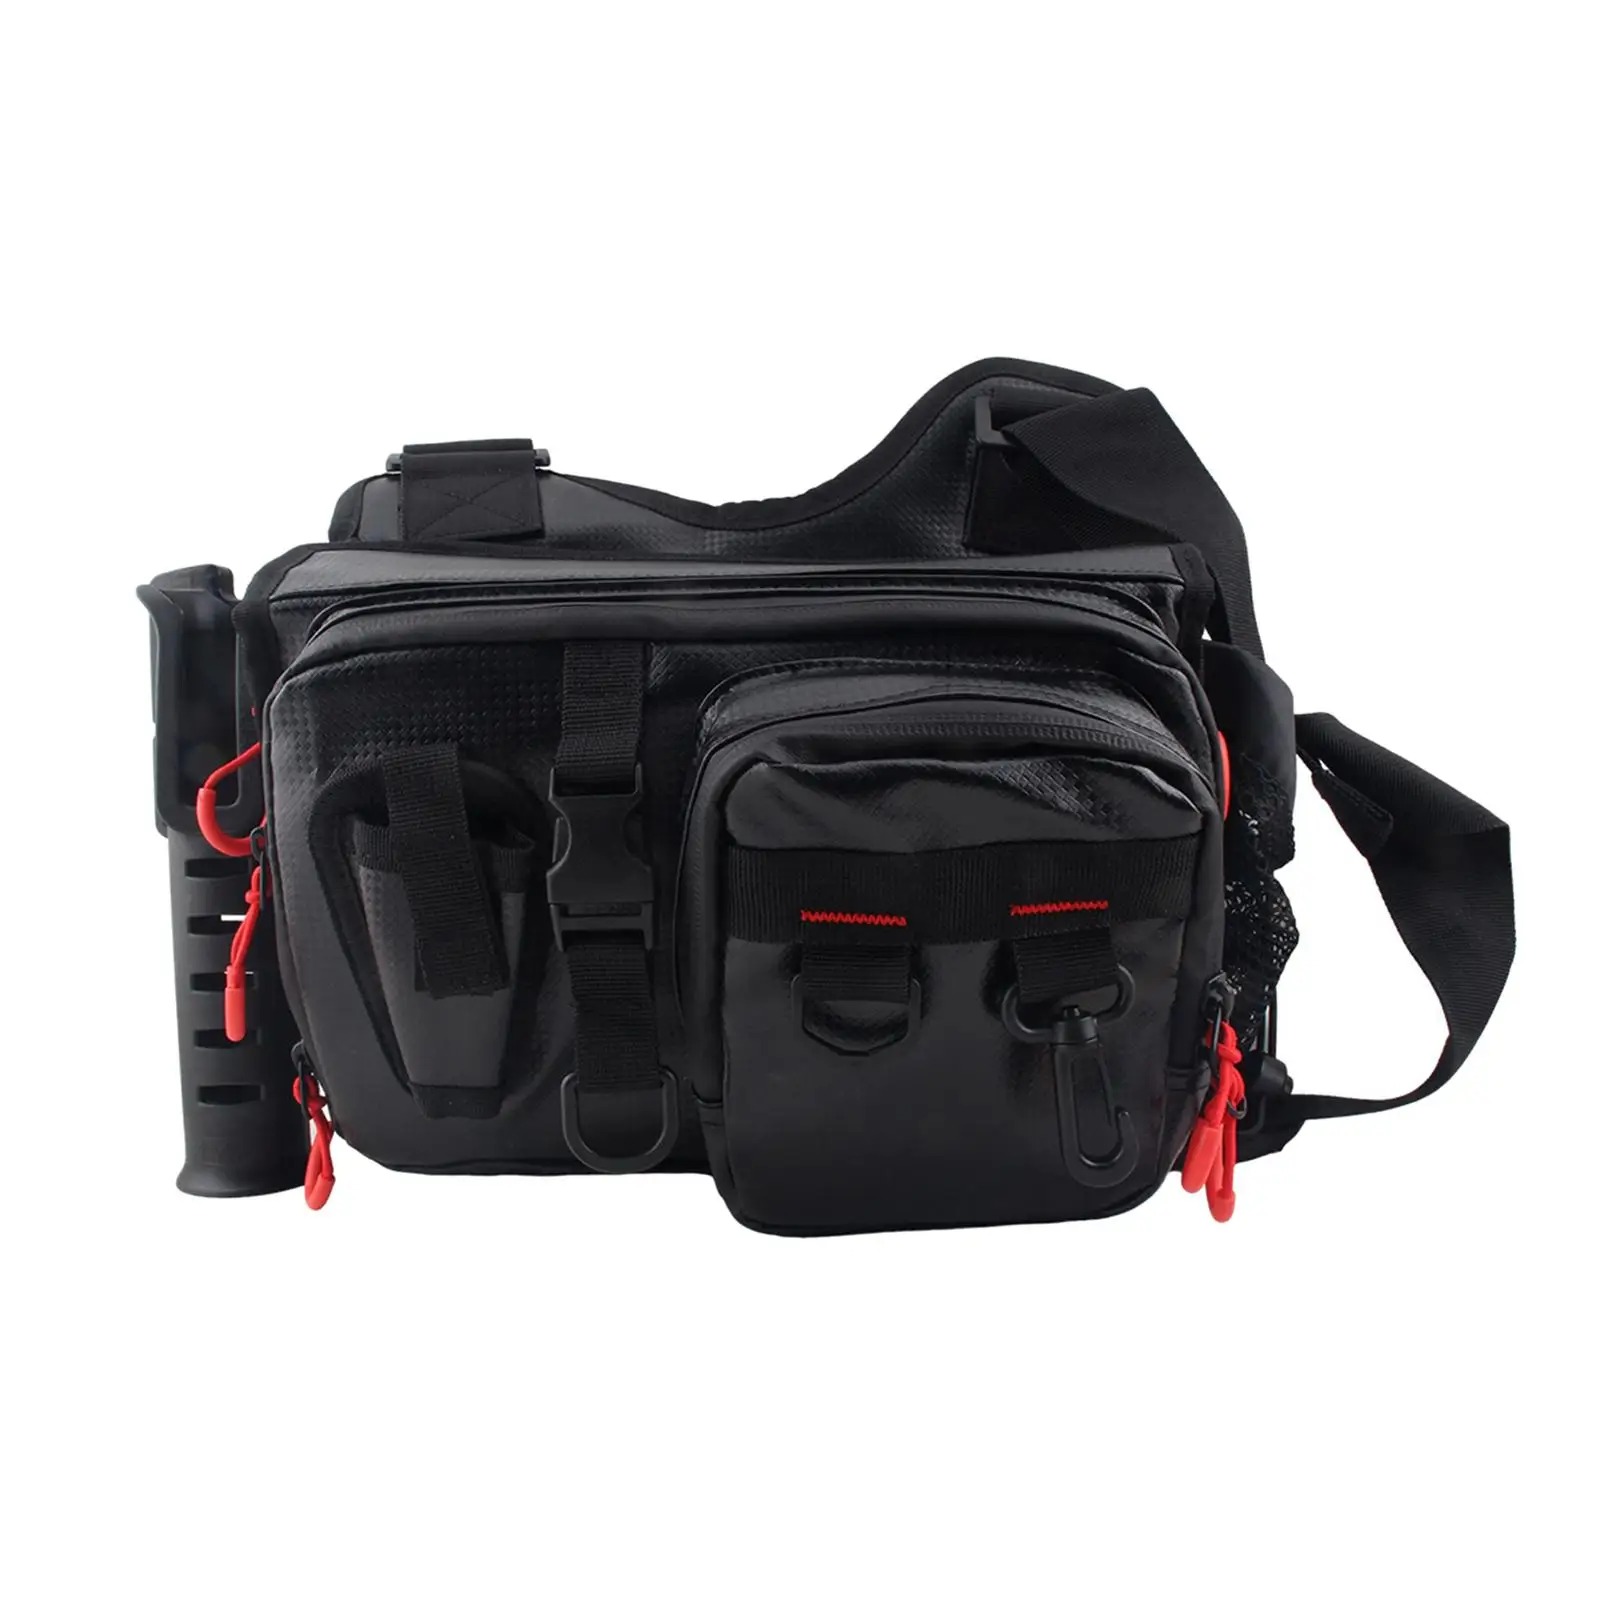 Lure Bags Wear Resistant Large Capacity Supplies Durable Resistant Fishing Bag Fanny Pack for Outdoor Fishing Hiking Camping Men